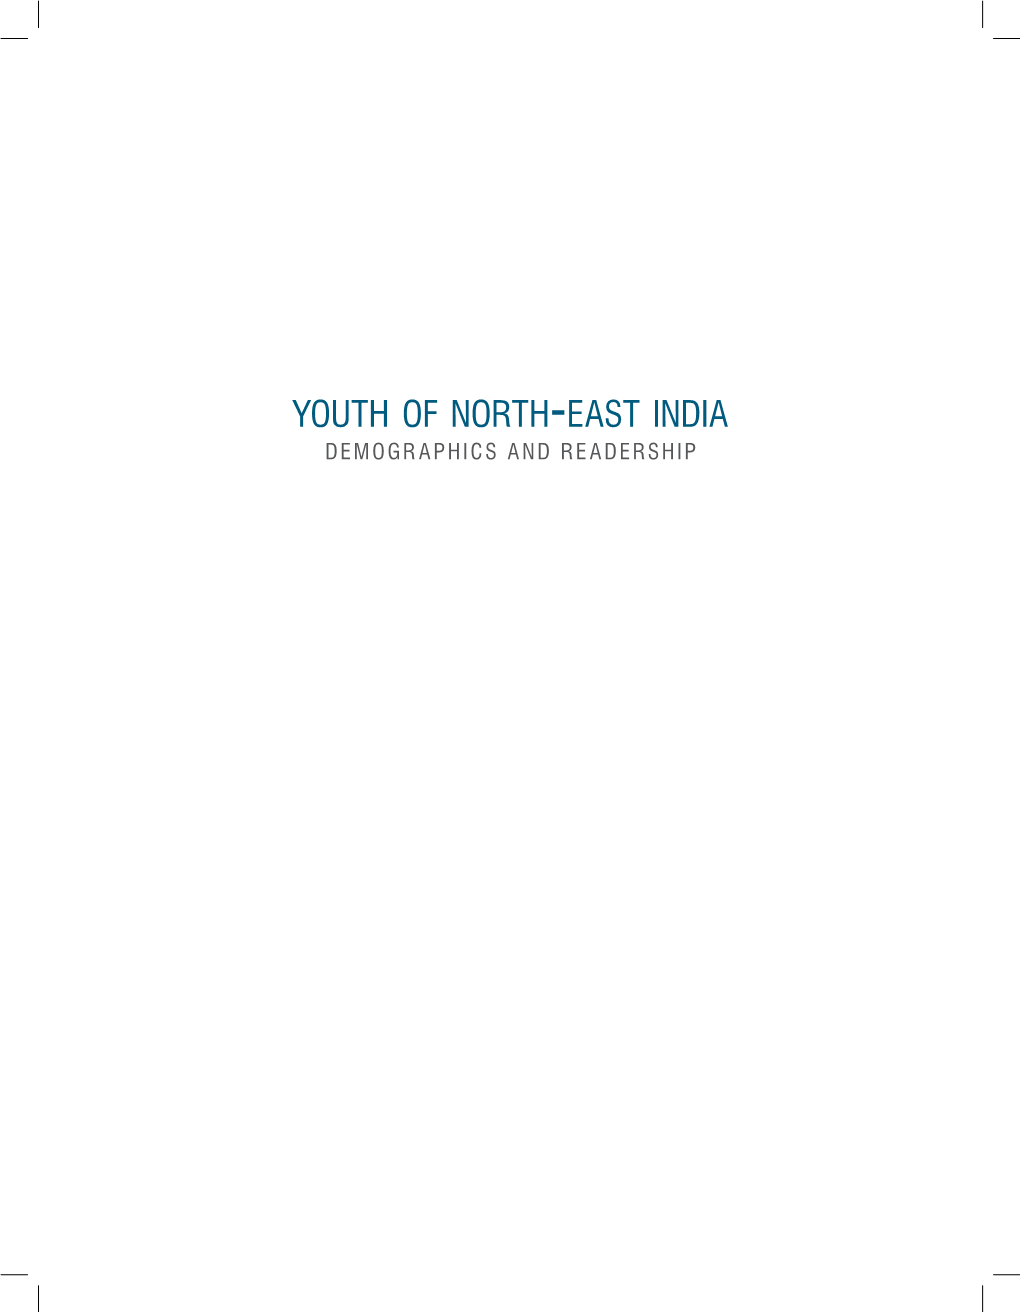 Youth of North -East India